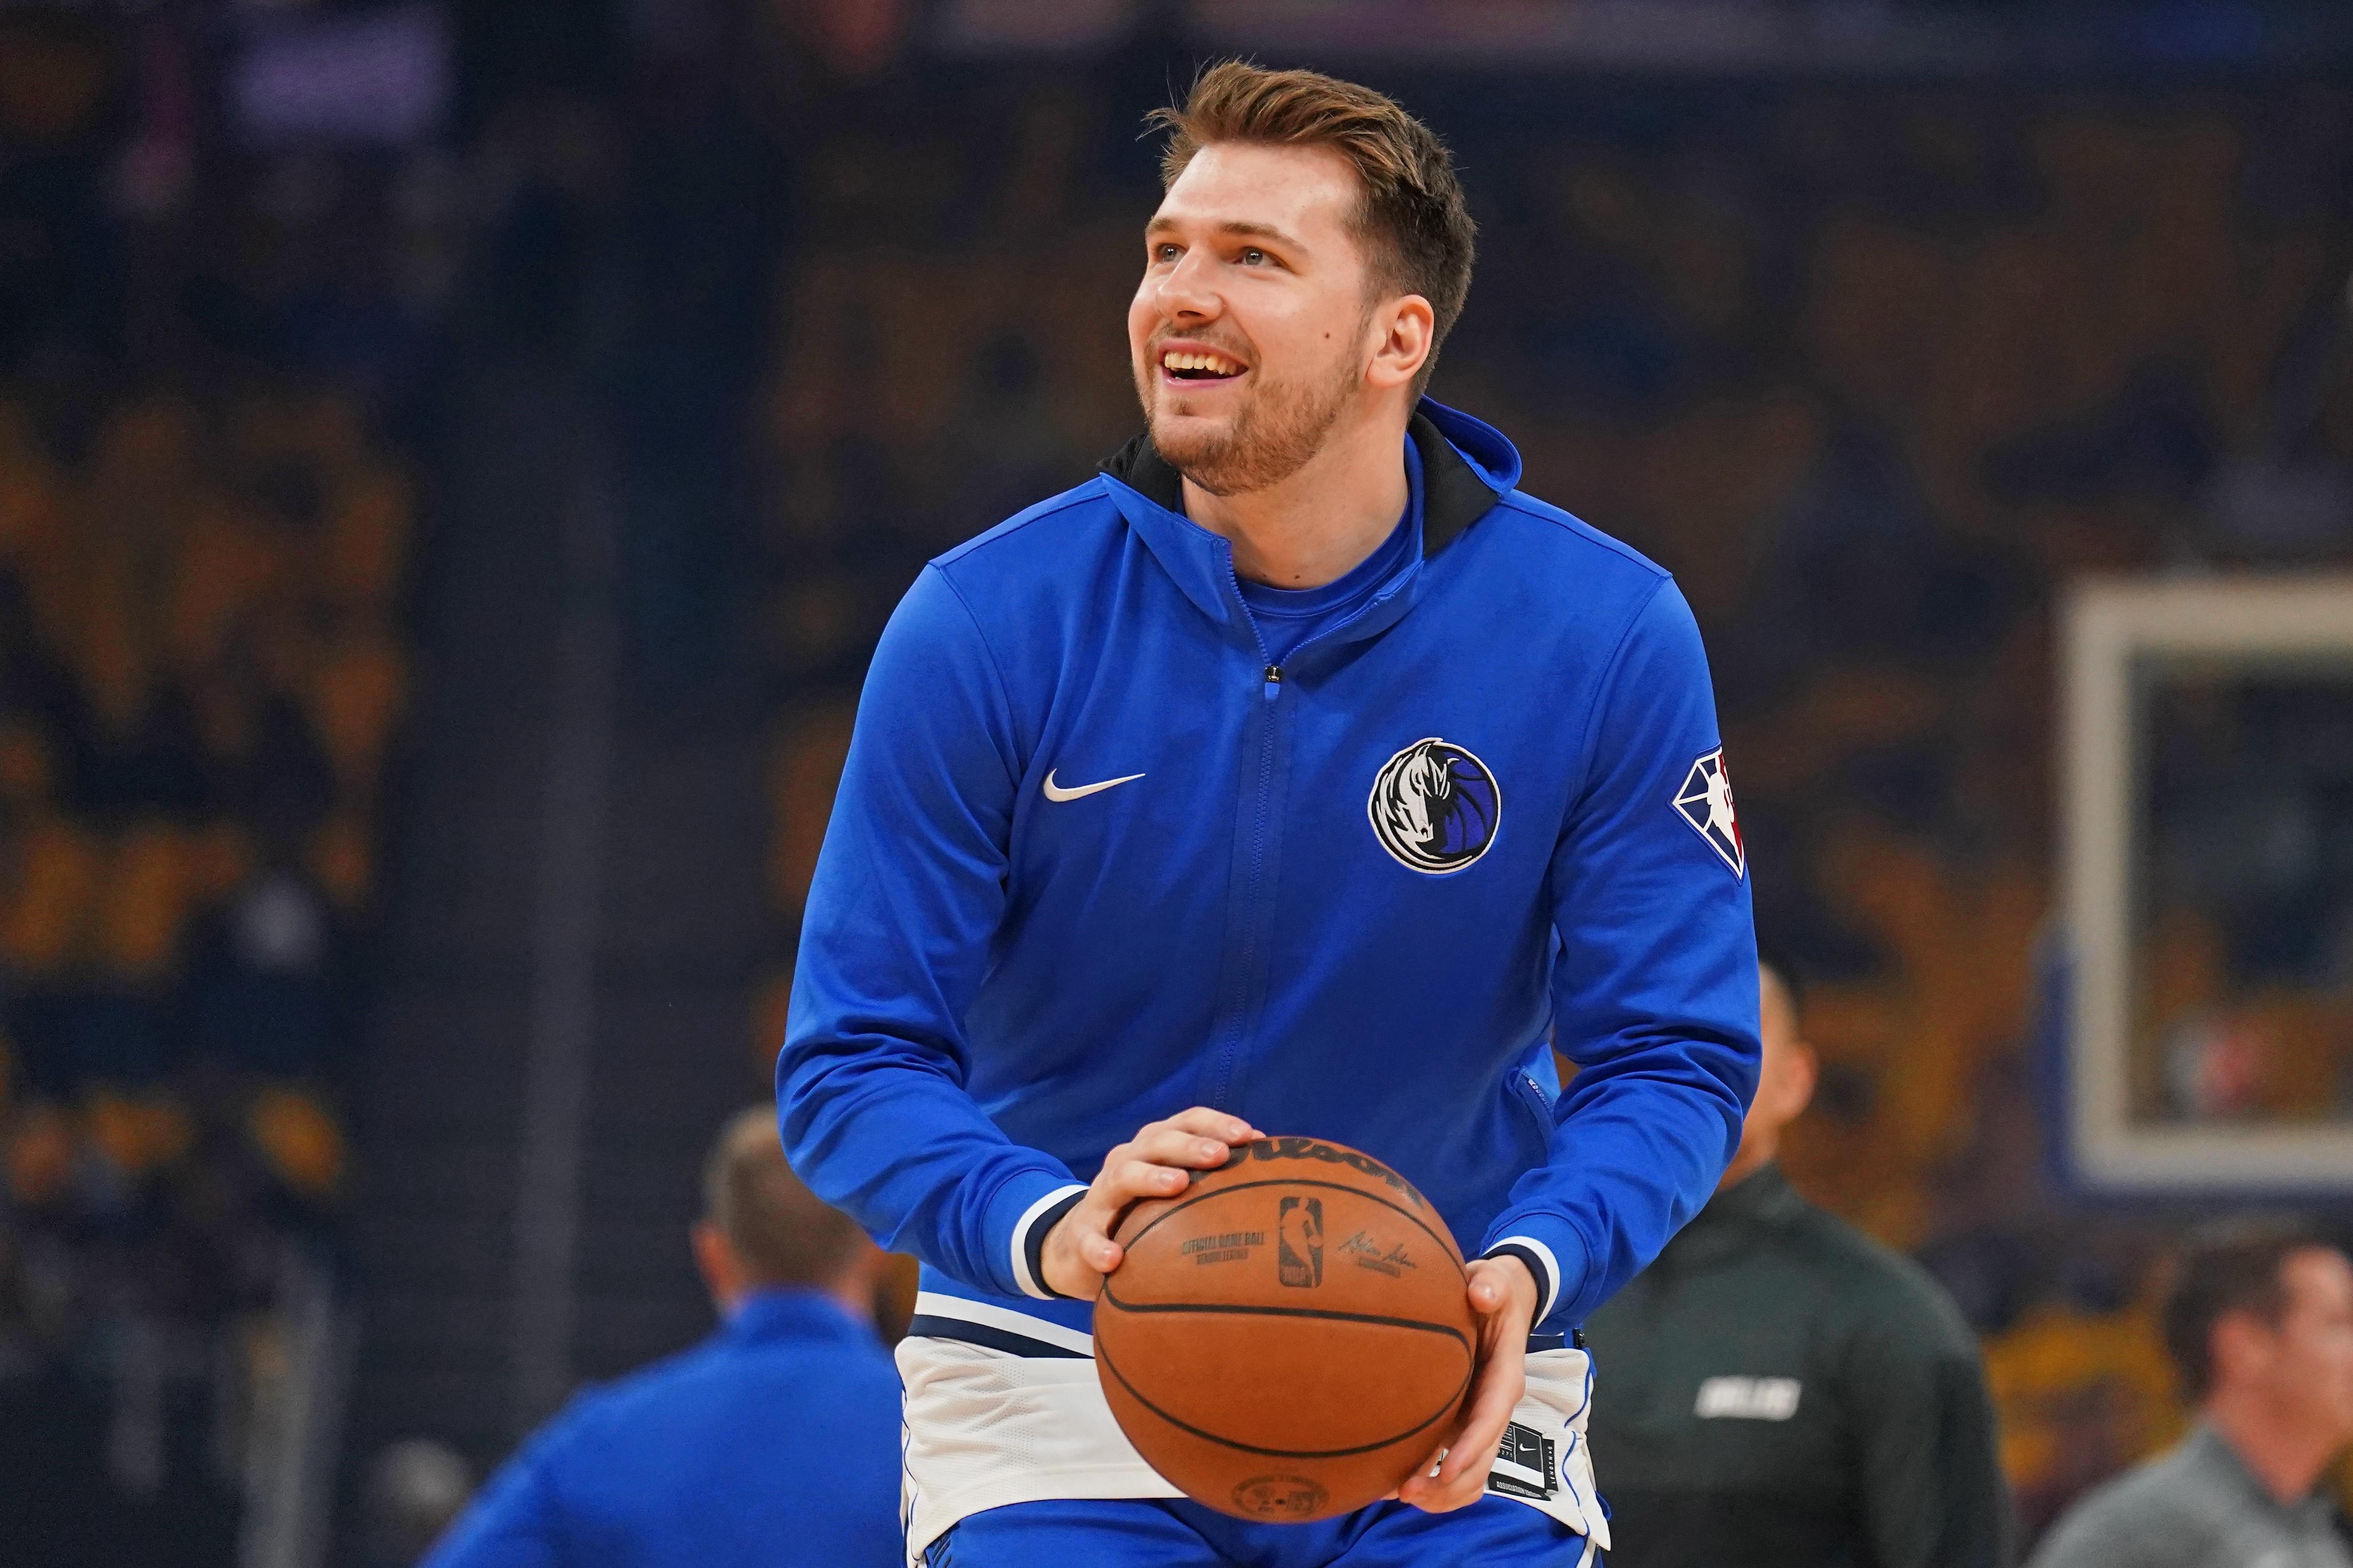 2023 NBA MVP Odds: Luka Doncic Favored Over Joel Embiid and Giannis Antetokounmpo on FanDuel Sportsbook